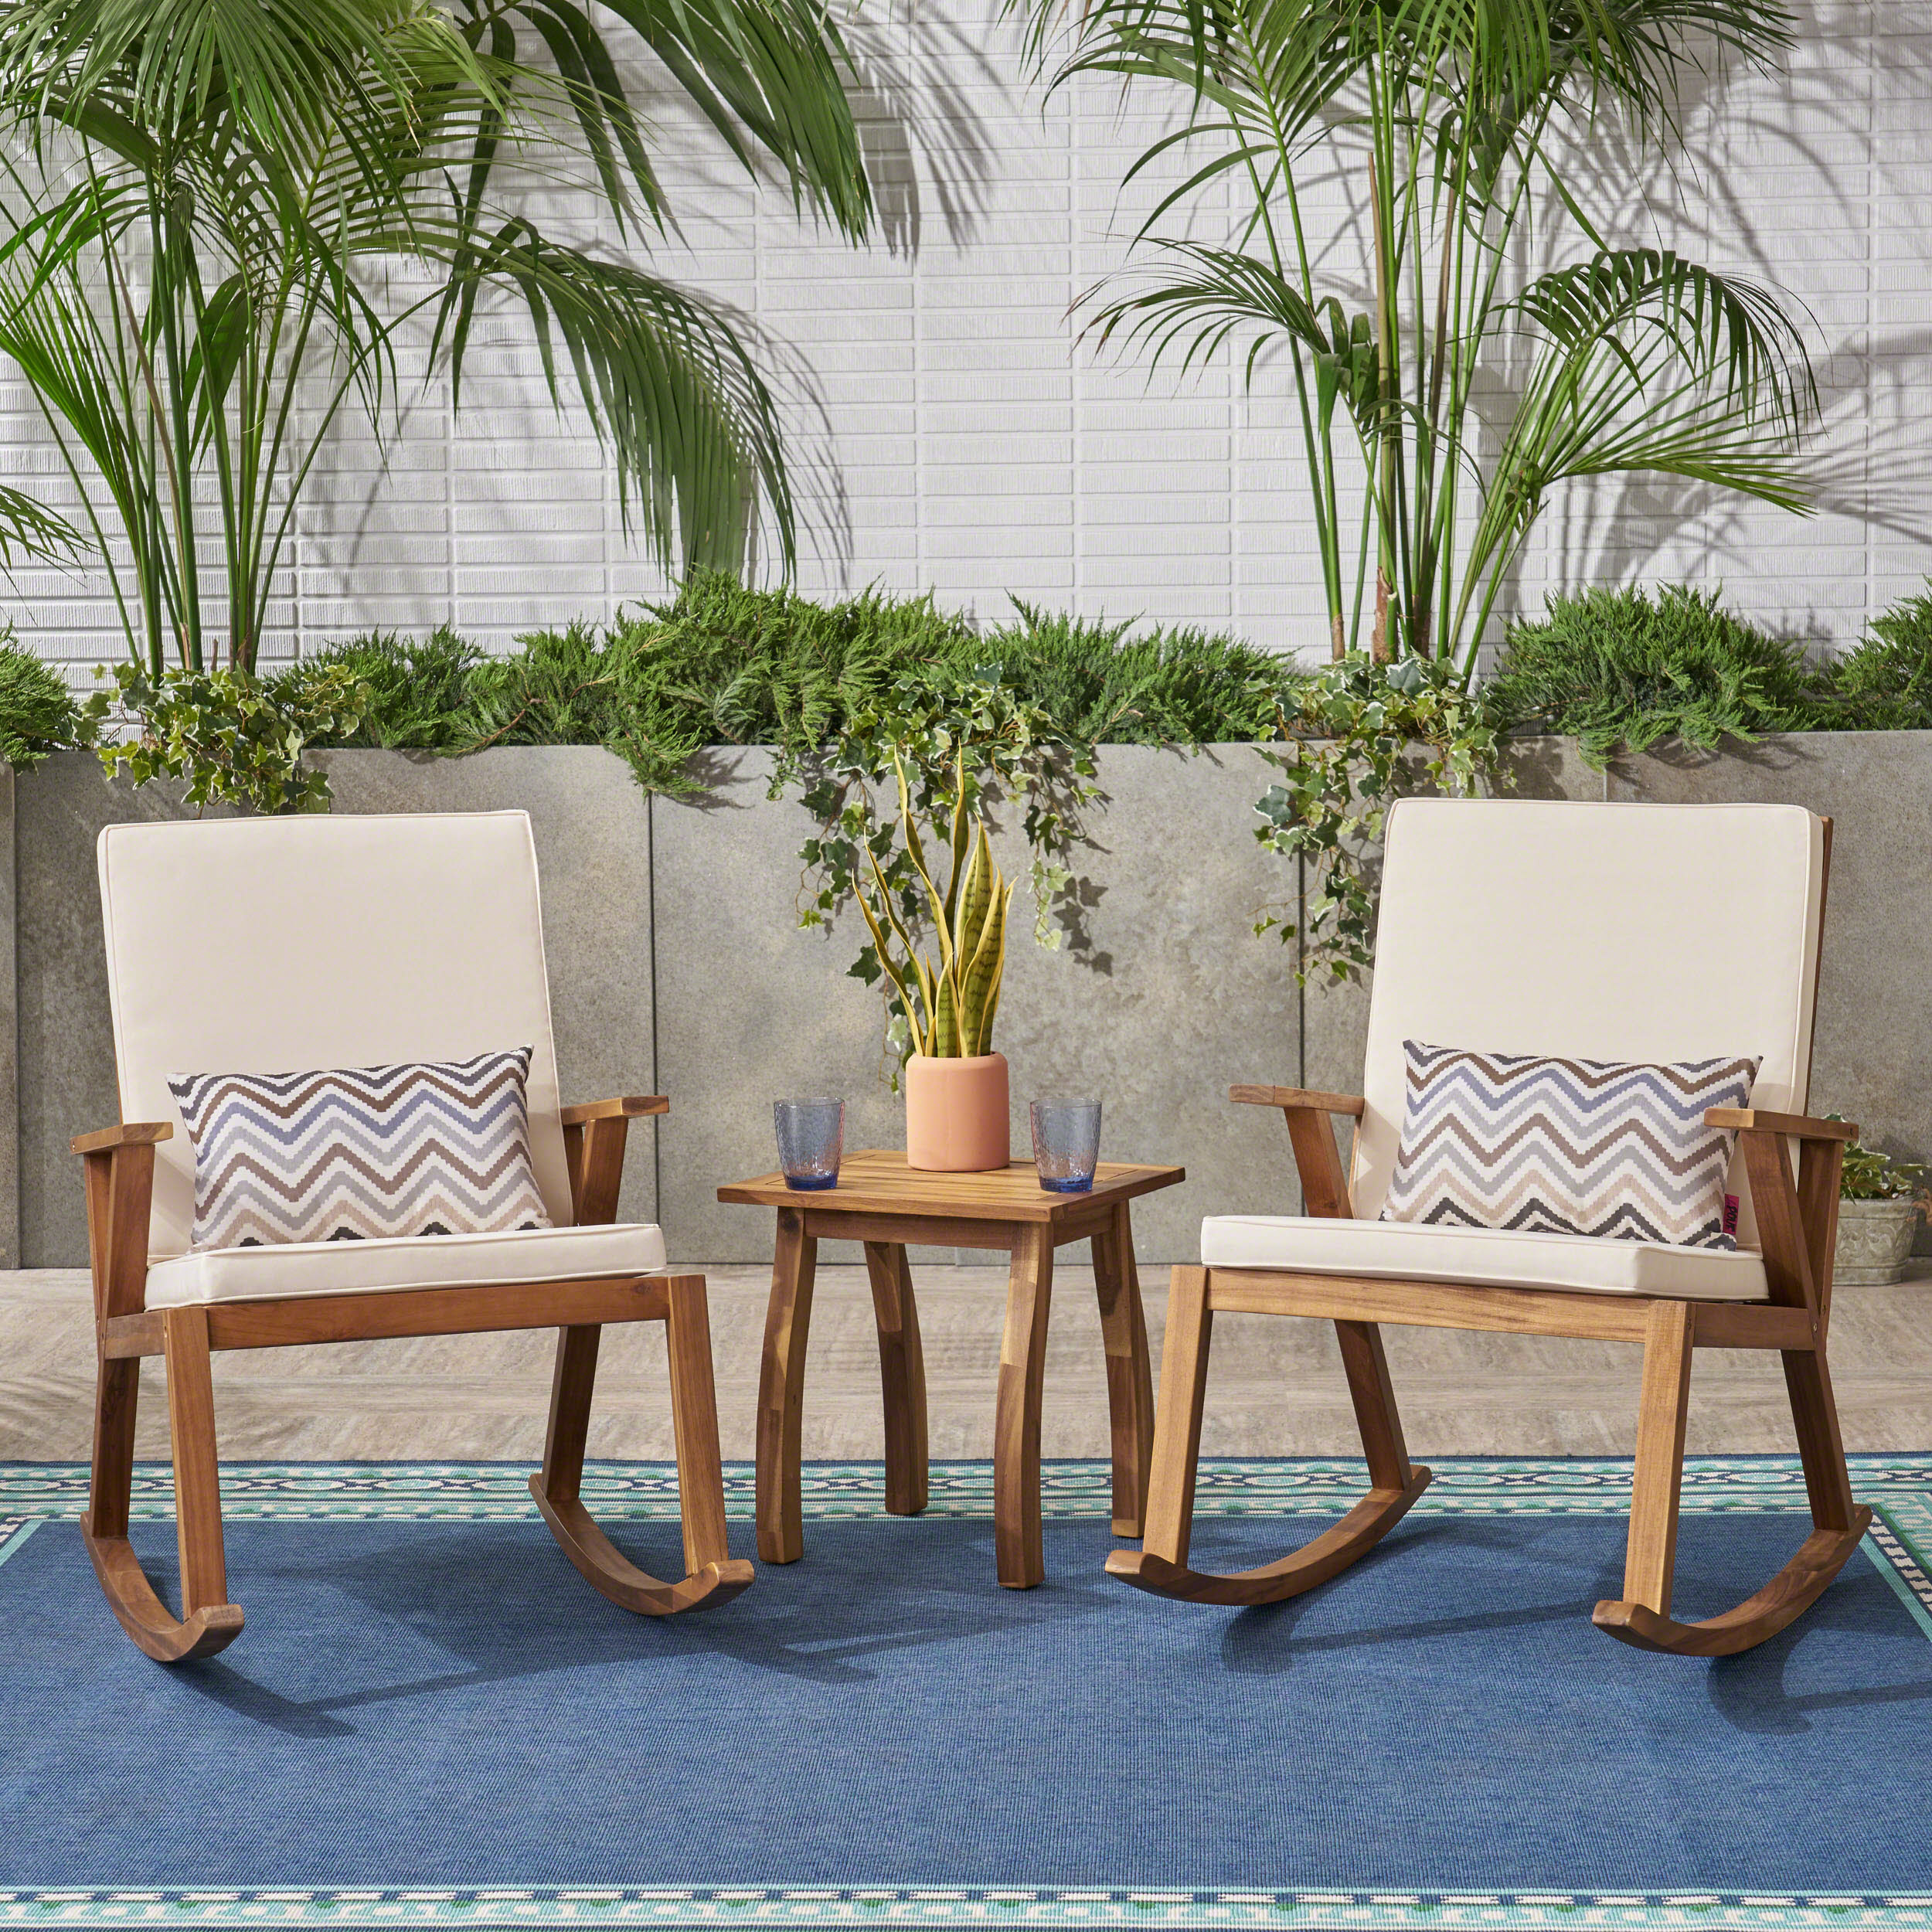 Brixton Outdoor Acacia Wood Rocking Chair Chat Set, Teak and Cream Cushions - image 1 of 8